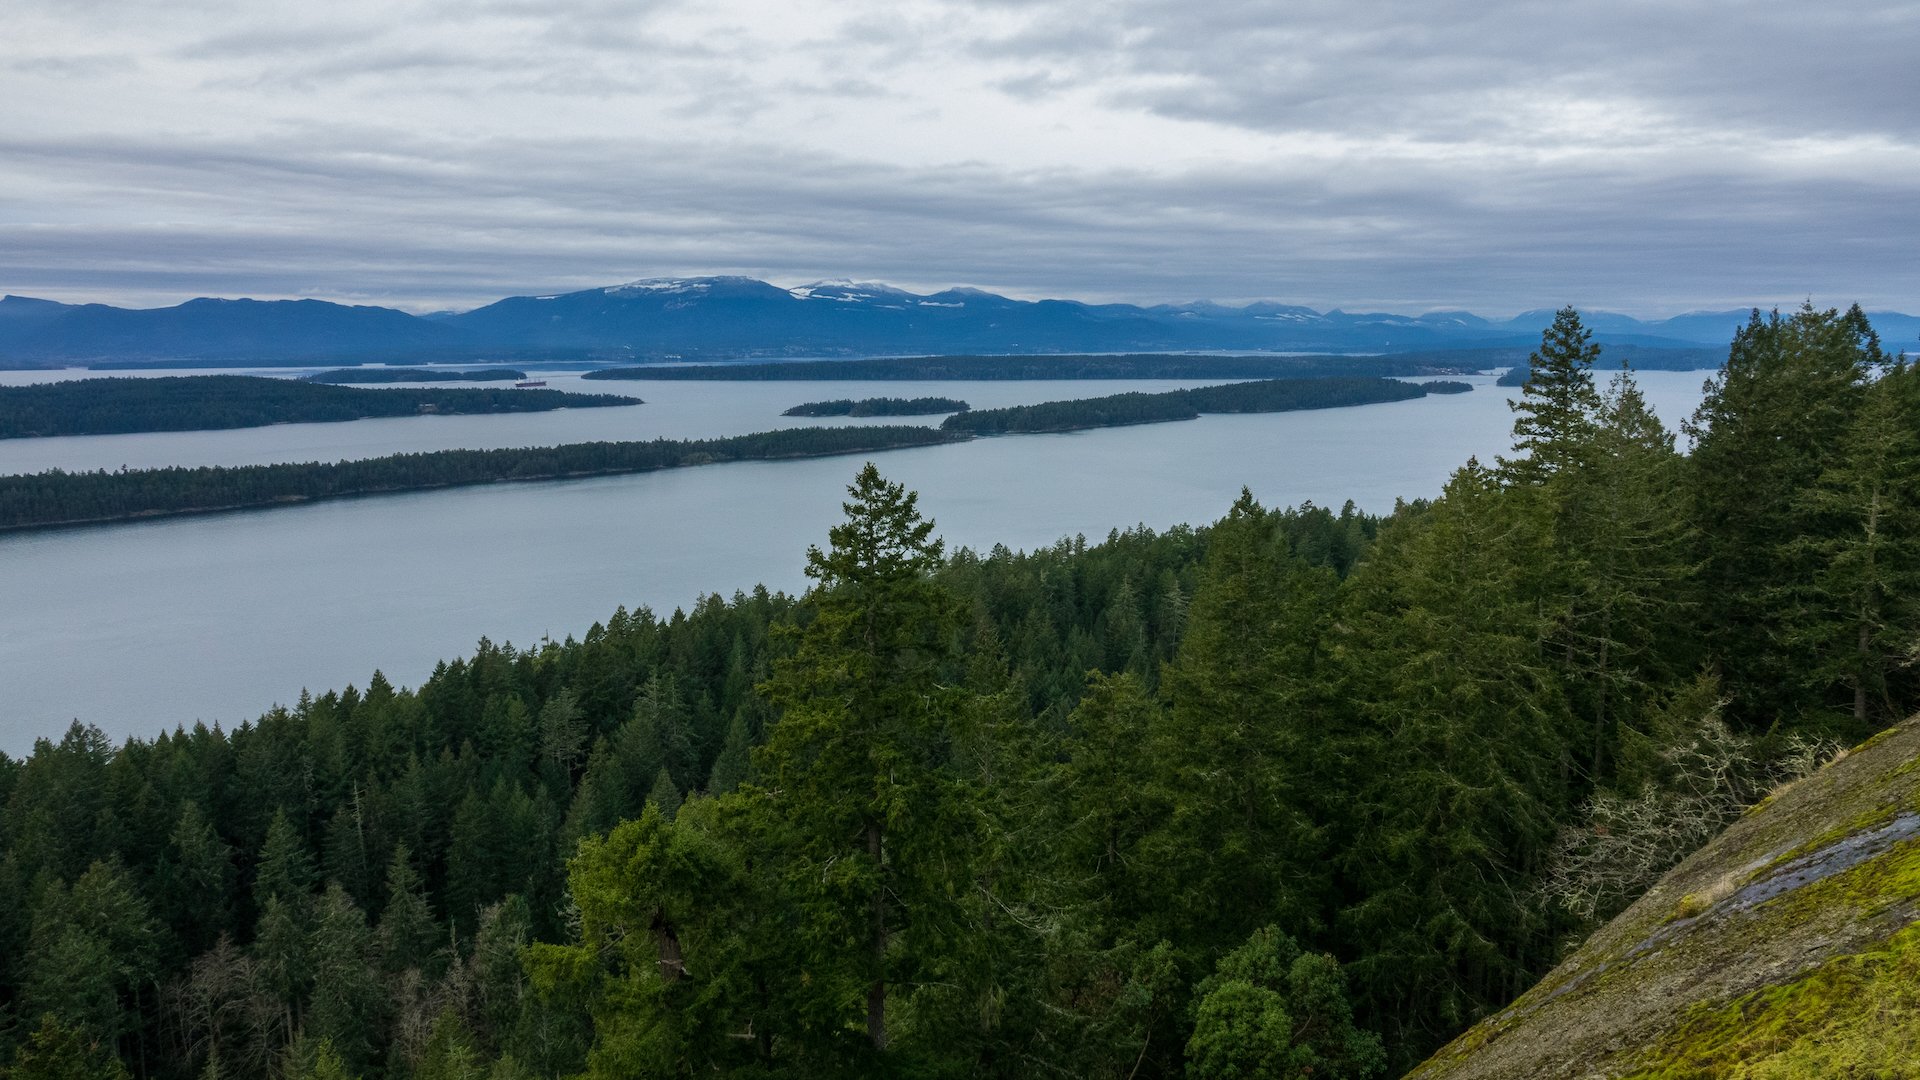  Looking across Salt Spring over to Vancouver Island. 